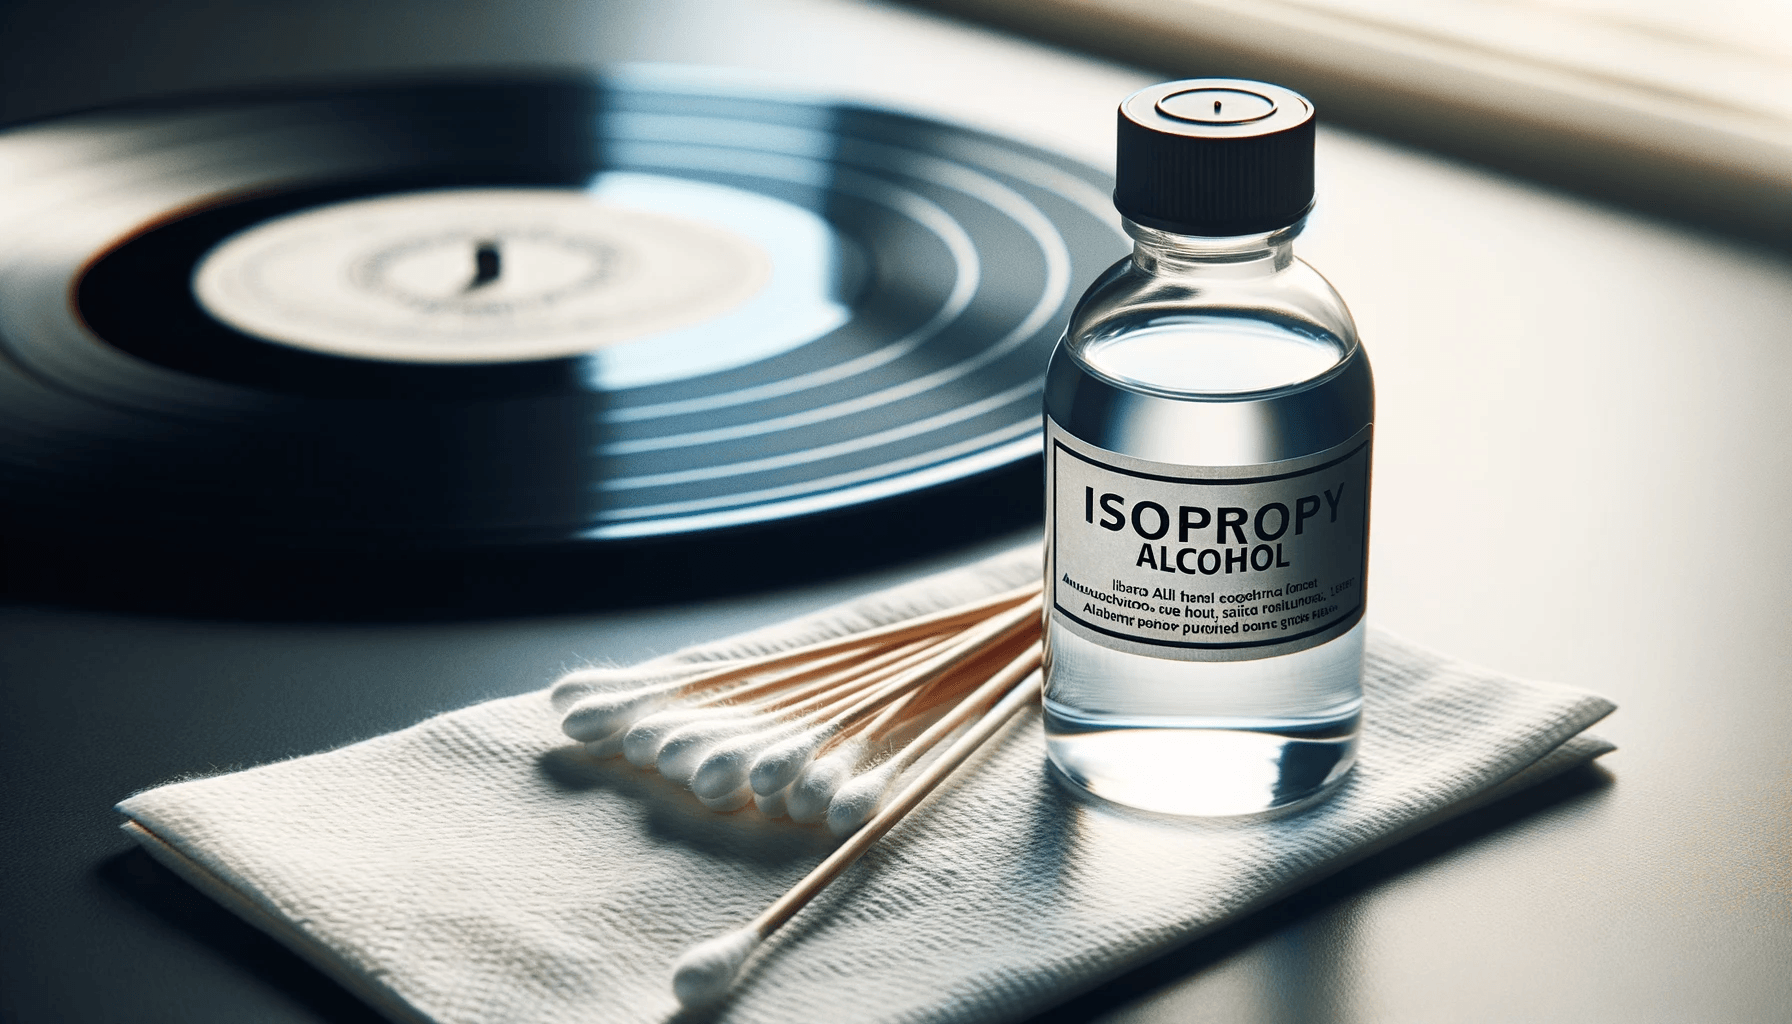 Depicting a cotton swab and a clear bottle labeled 'Isopropyl Alcohol' placed on a table. In the soft-focused background, a vinyl record rests